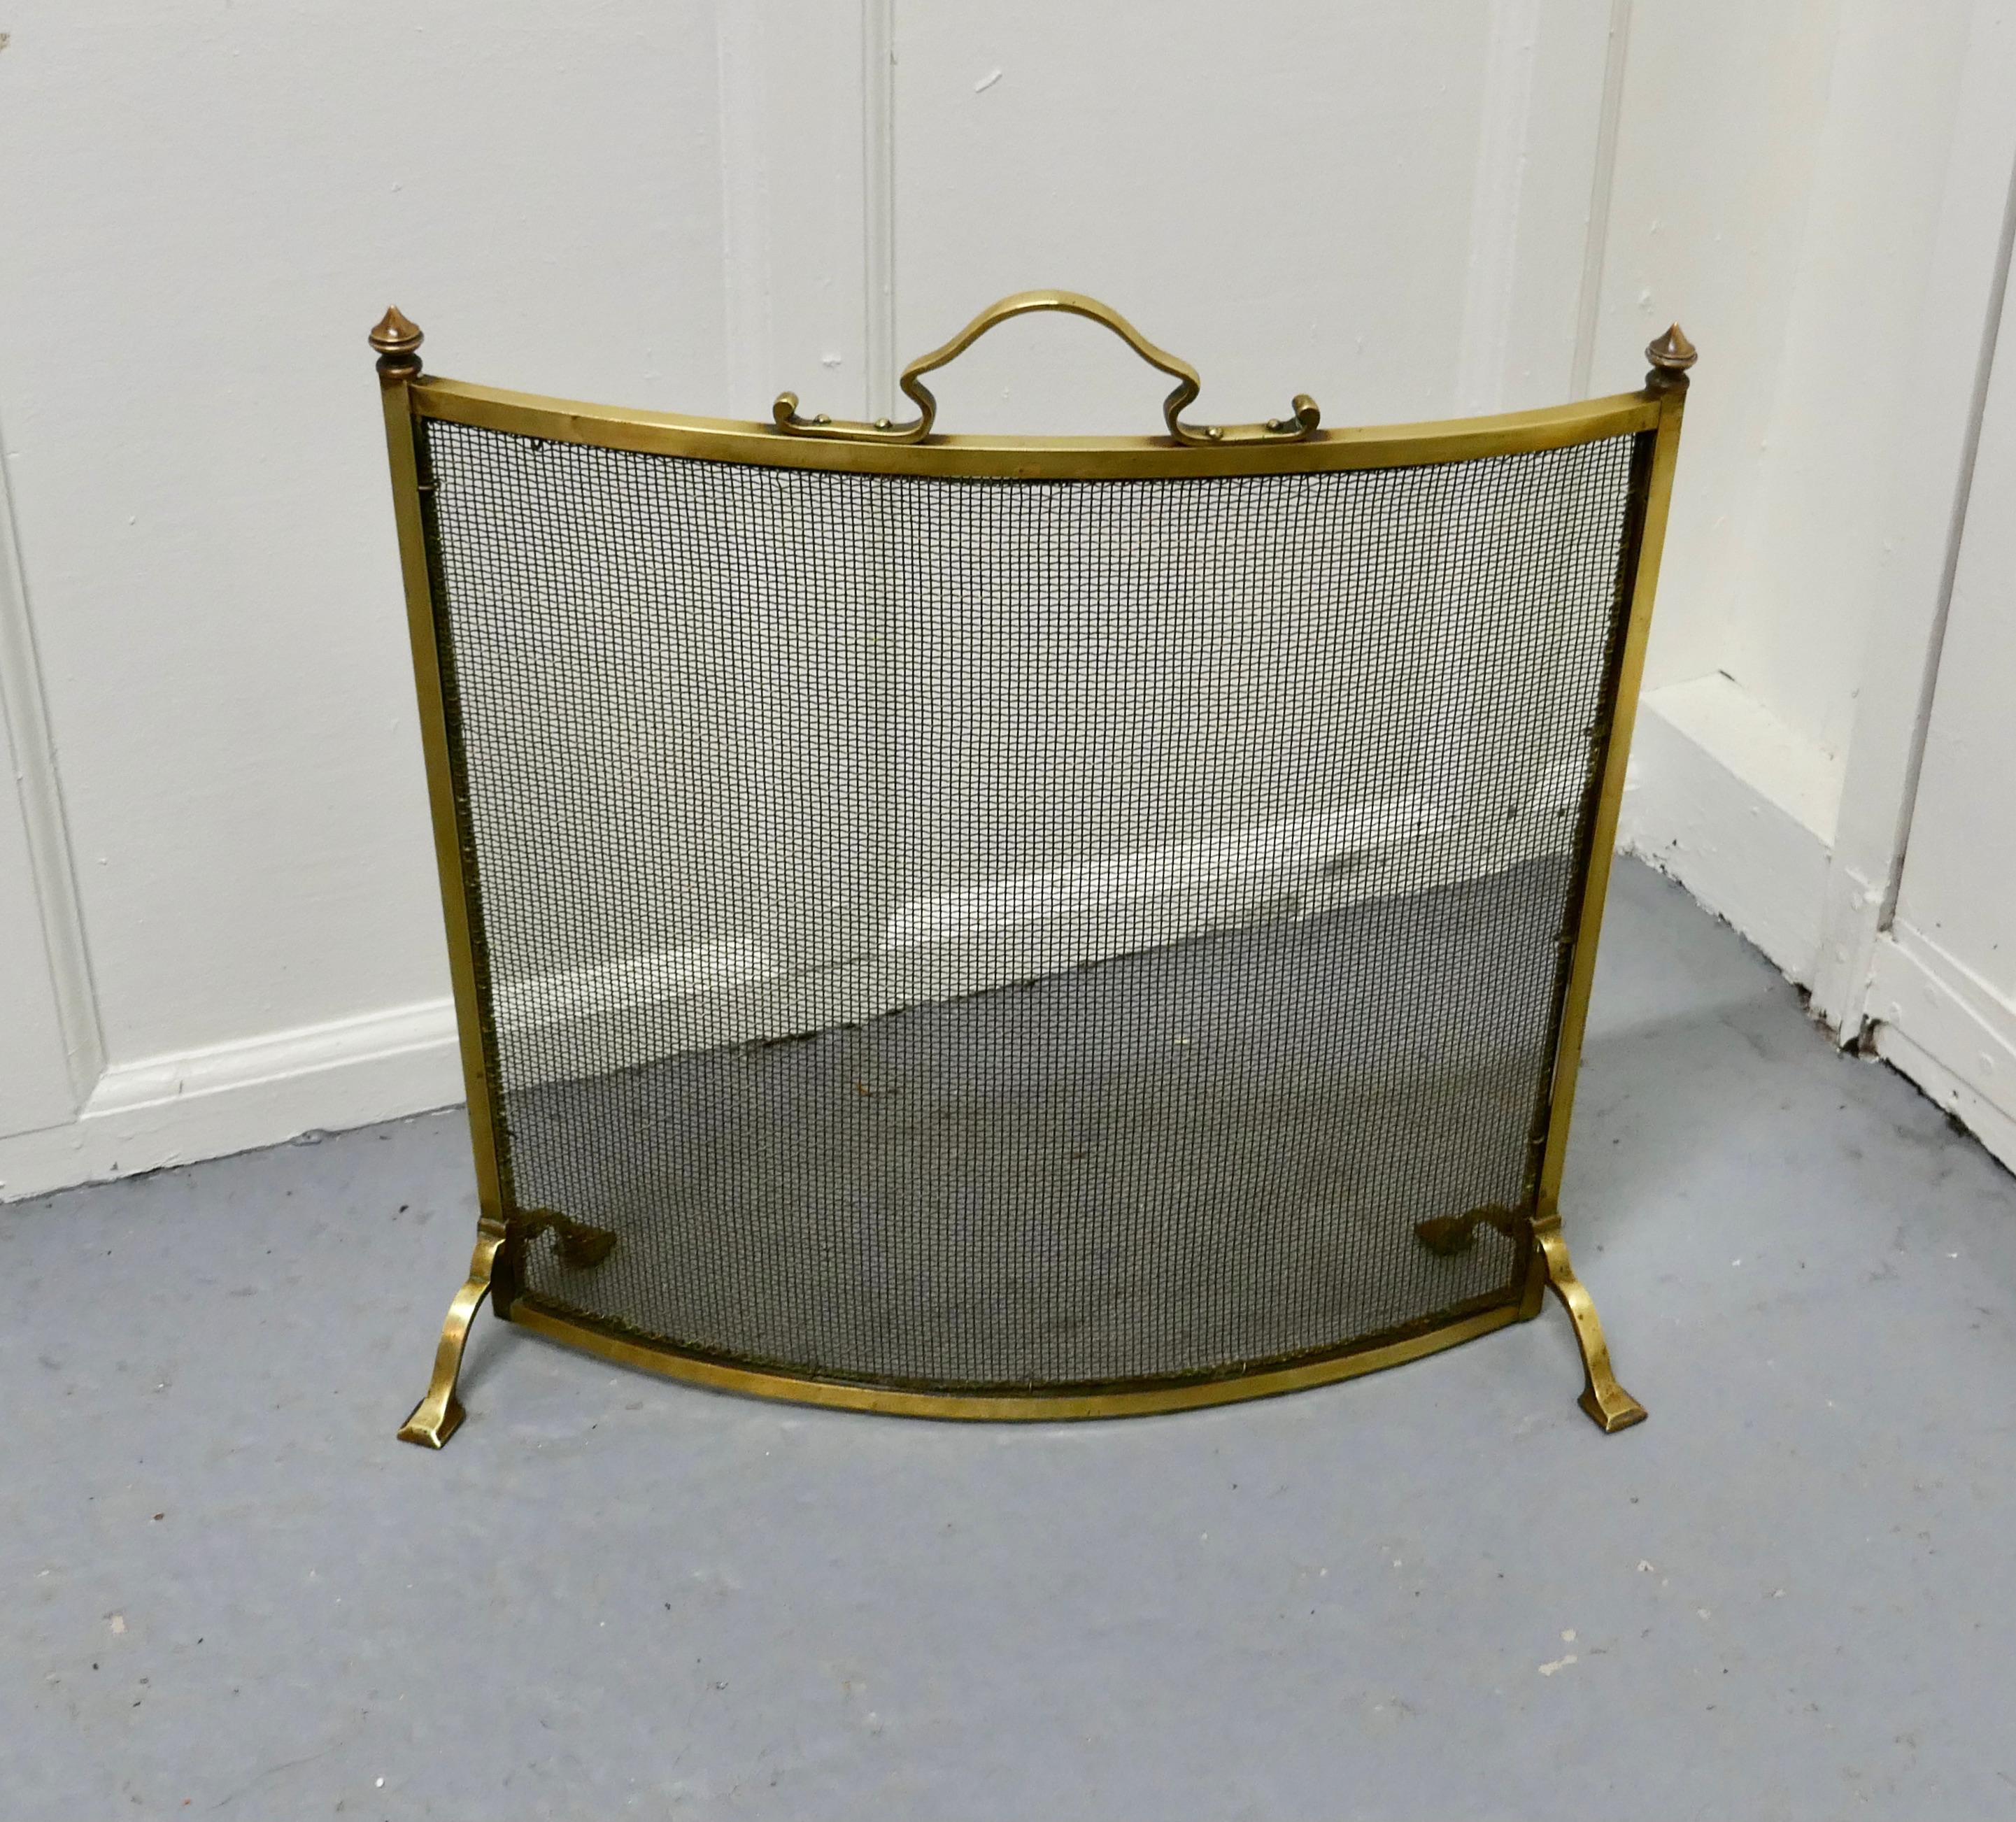 Victorian Arts & Crafts curved brass fire guard, spark screen

The fire guard is a stylish good quality piece it is made in brass with a fine brass mesh screen, it is a very unusual but very sensible curved shape.
A delightful decorative piece